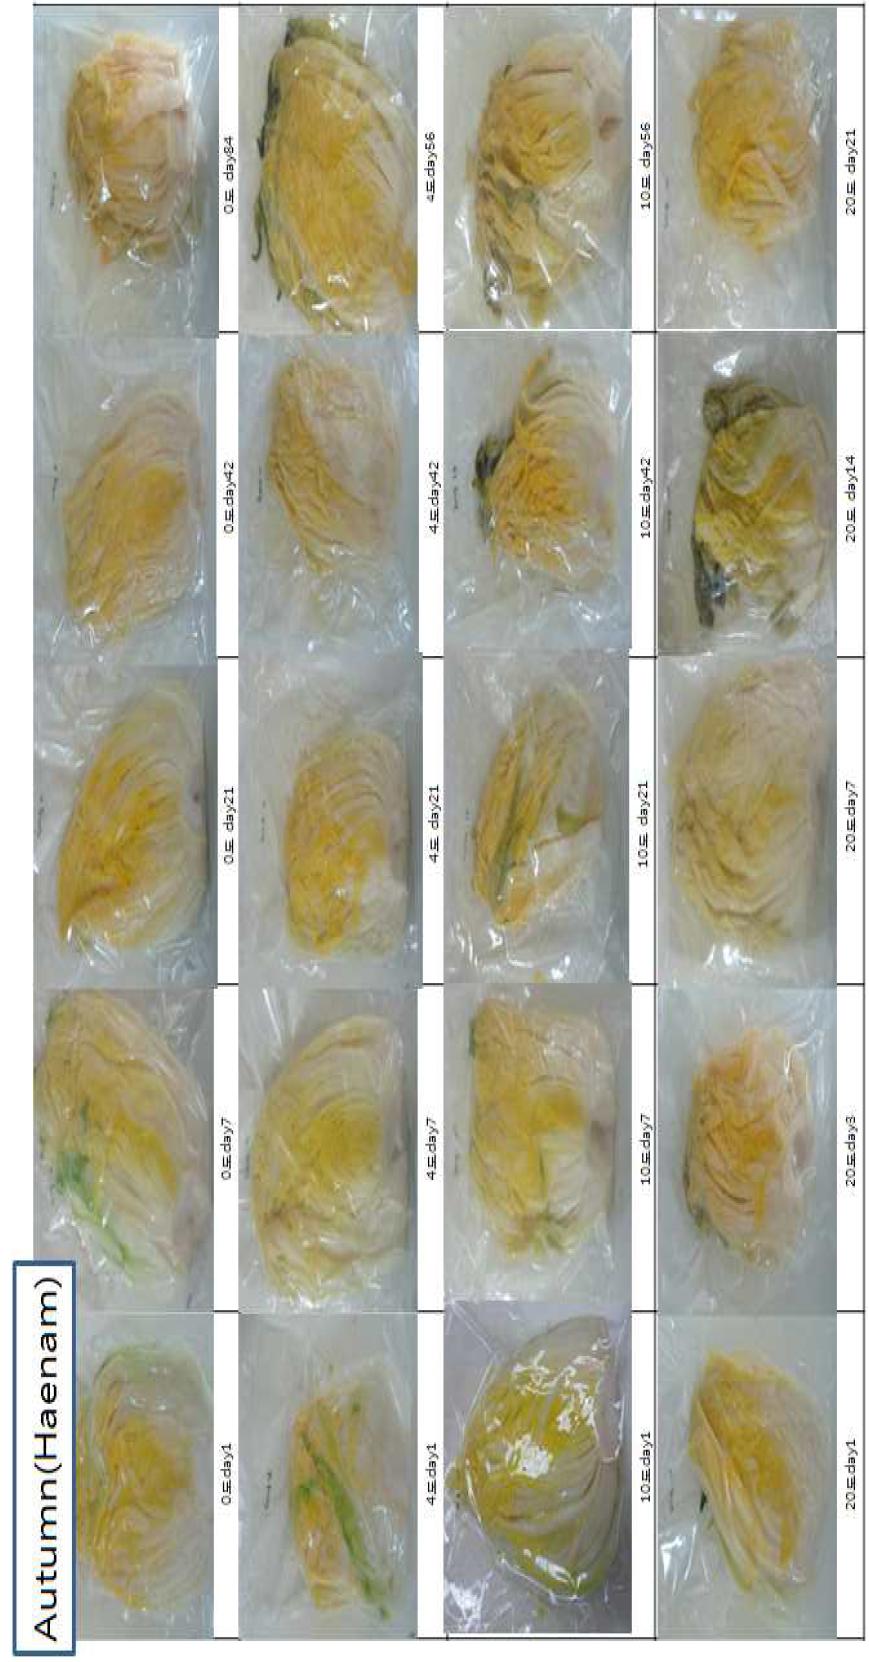 Appearance change of packaged salted autumn Kimchi cabbage according to storage temperature and period(Haenam)